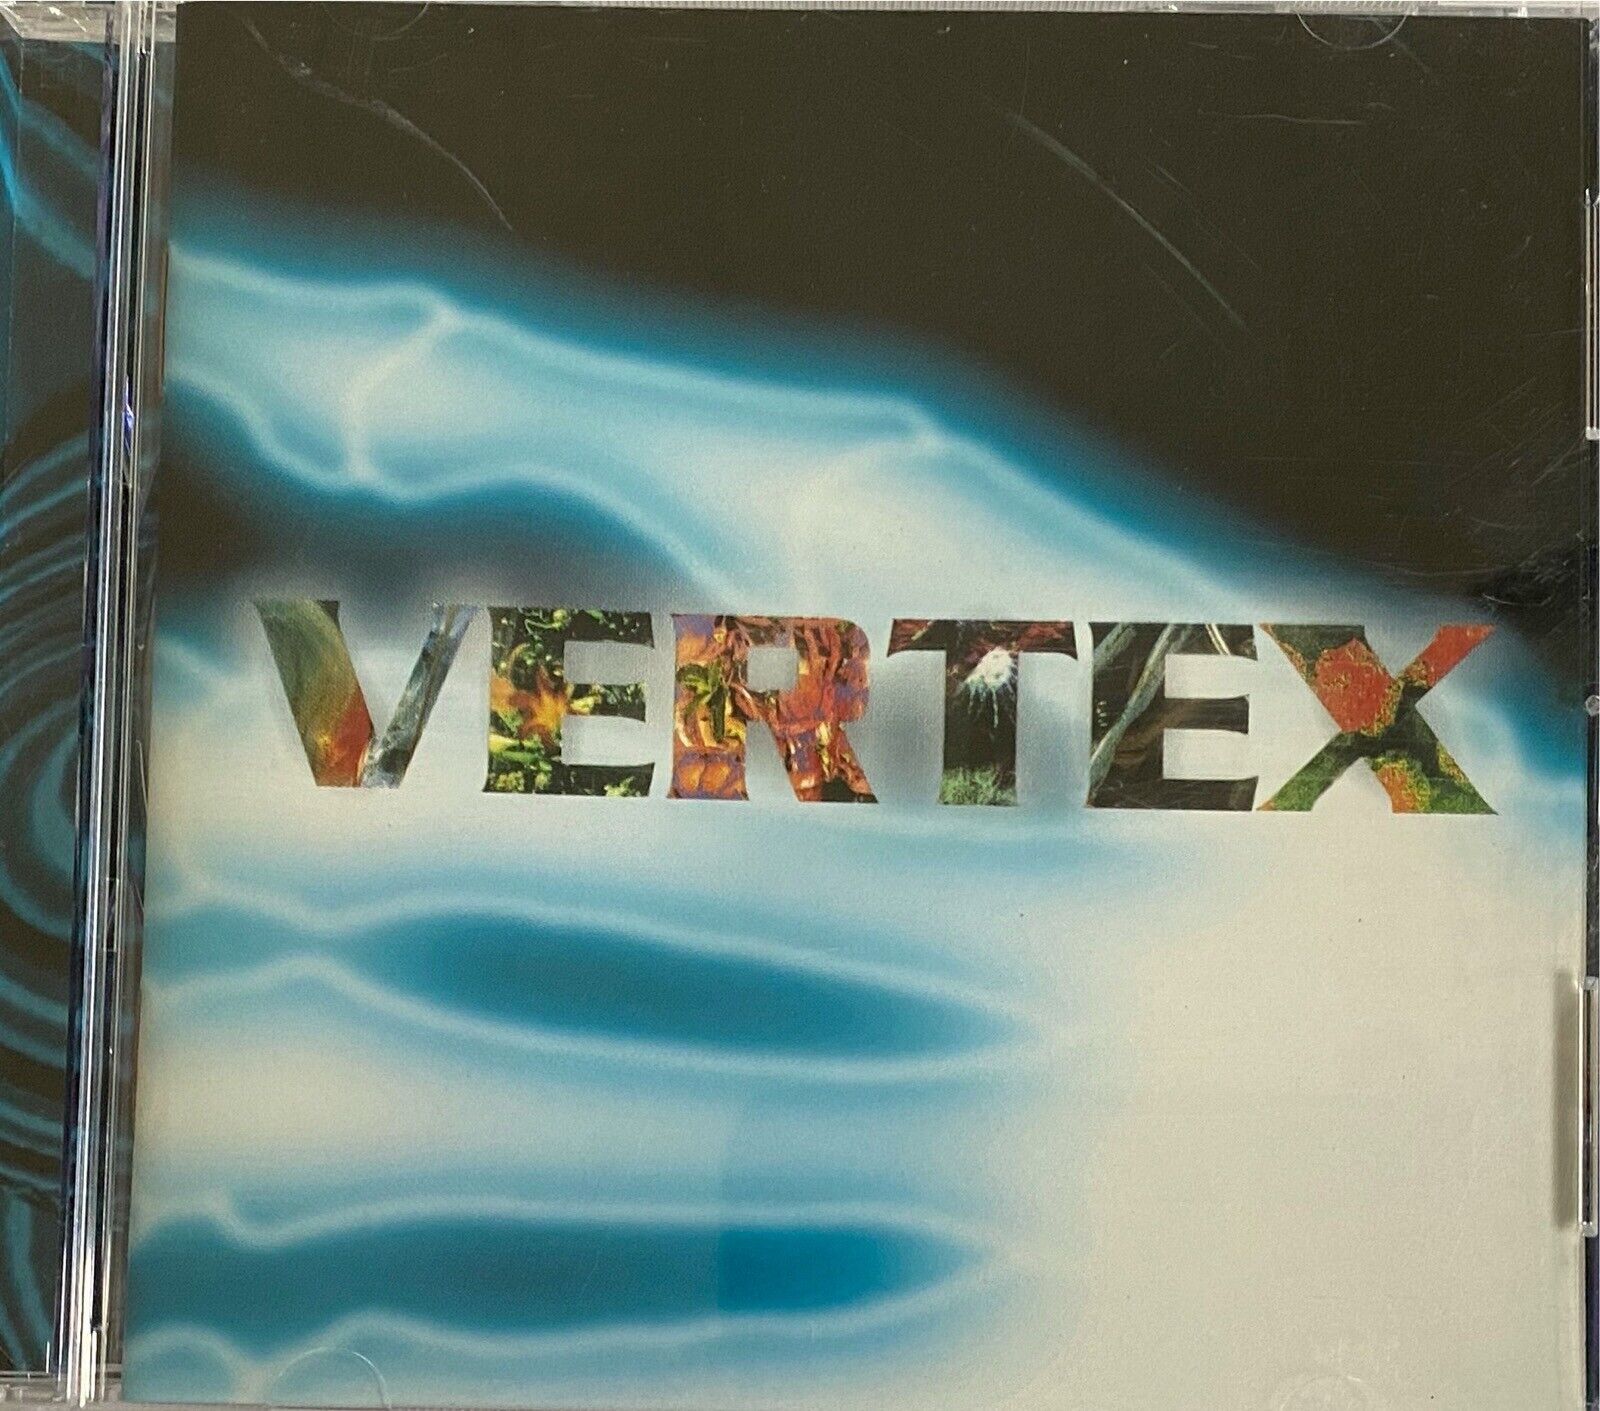 VERTEX - Self Titled S/T CD 1996 Blue Dolphin Exc Cond DB1